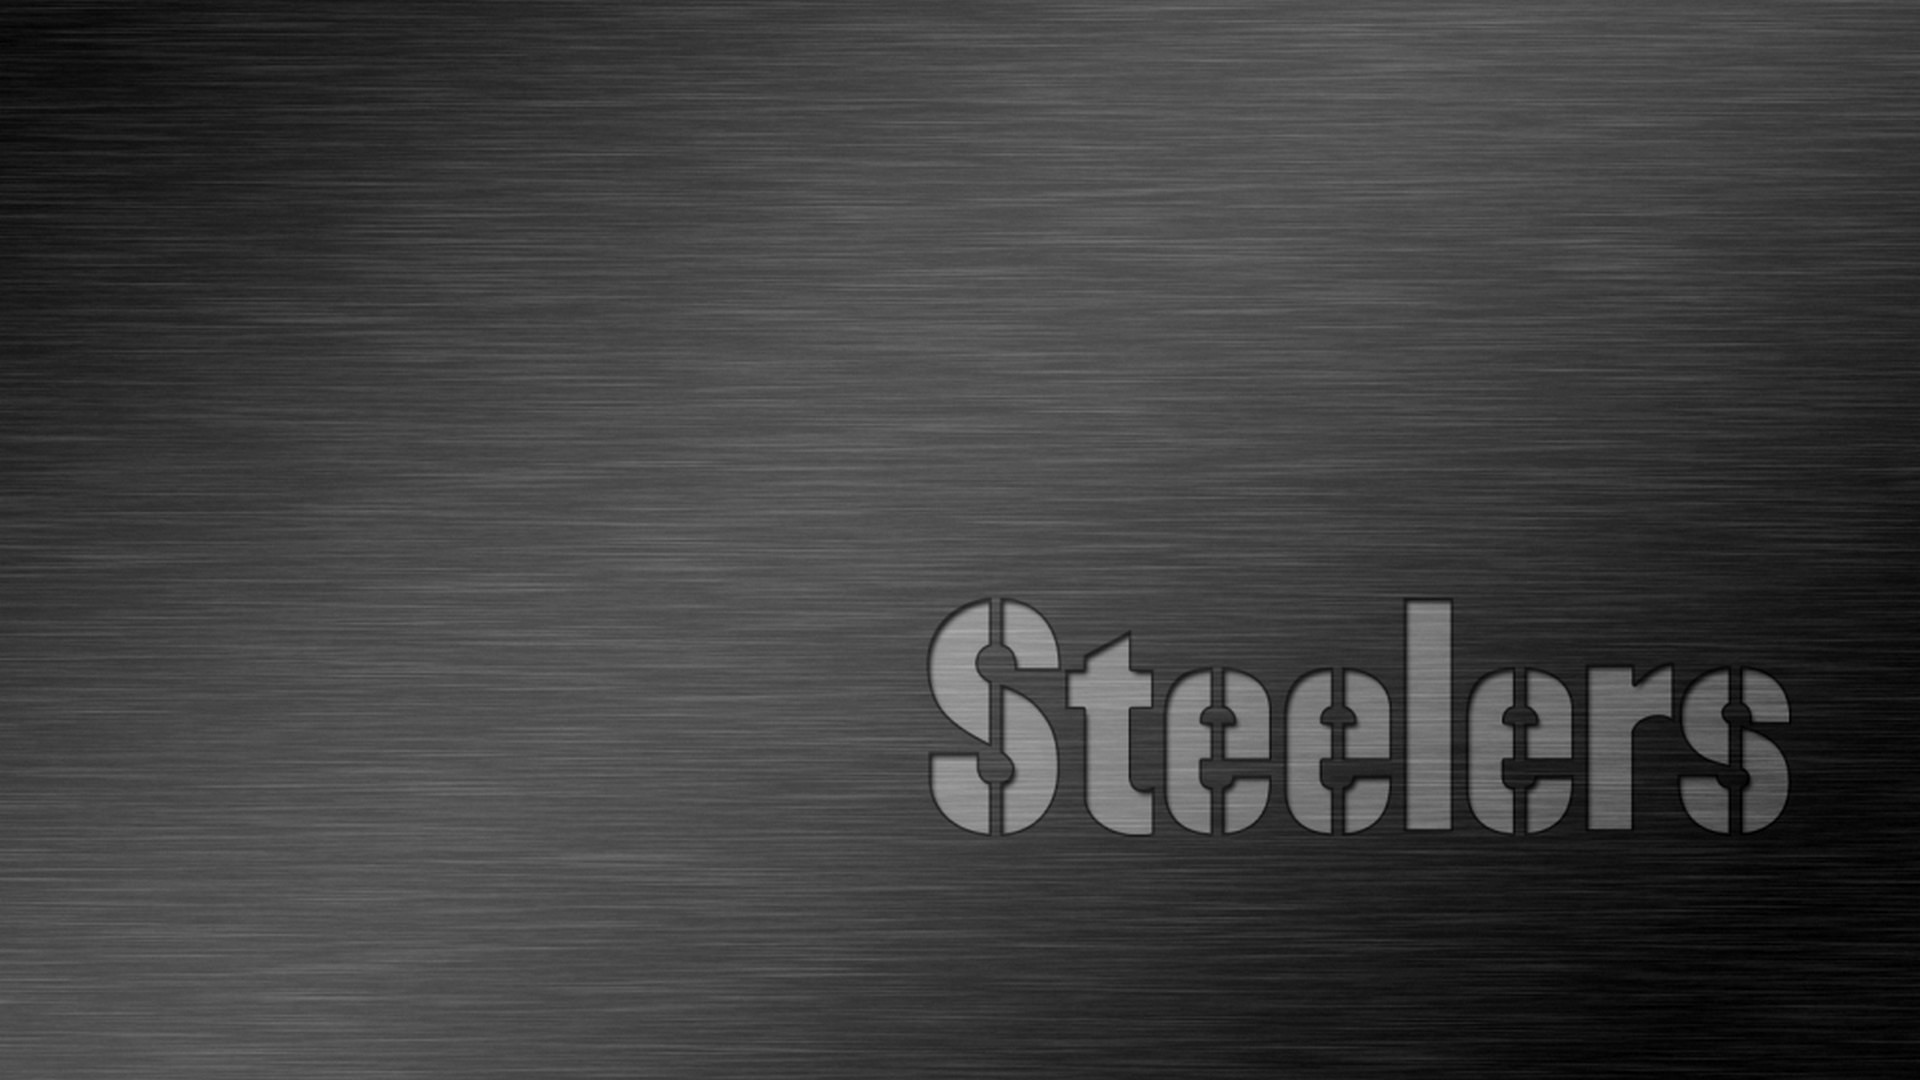 Best Steelers Wallpaper With high-resolution 1920X1080 pixel. You can use and set as wallpaper for Notebook Screensavers, Mac Wallpapers, Mobile Home Screen, iPhone or Android Phones Lock Screen